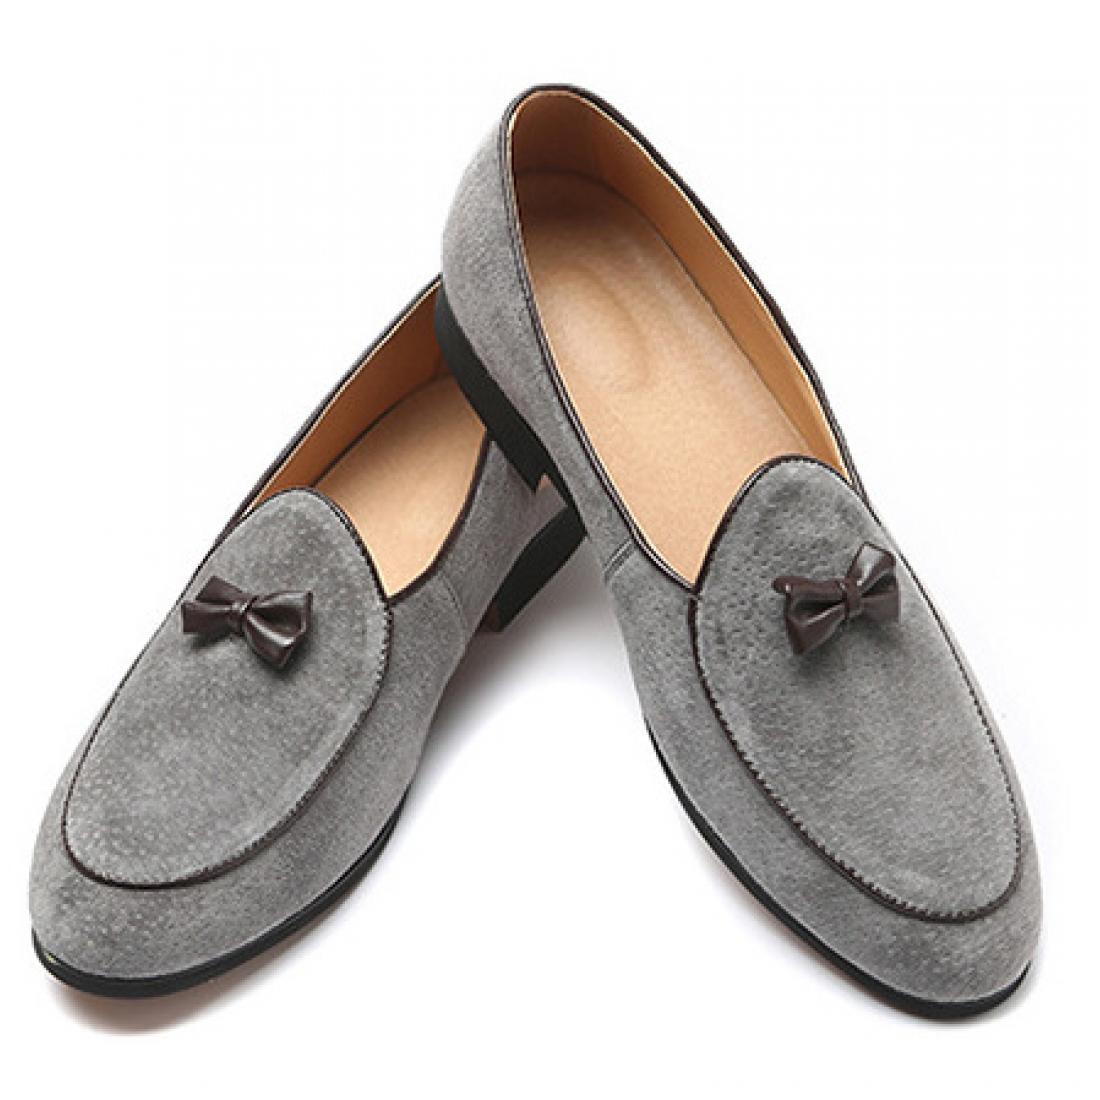 Grey Suede Mini Bow Dapper Mens Loafers Prom Dress Shoes 5612